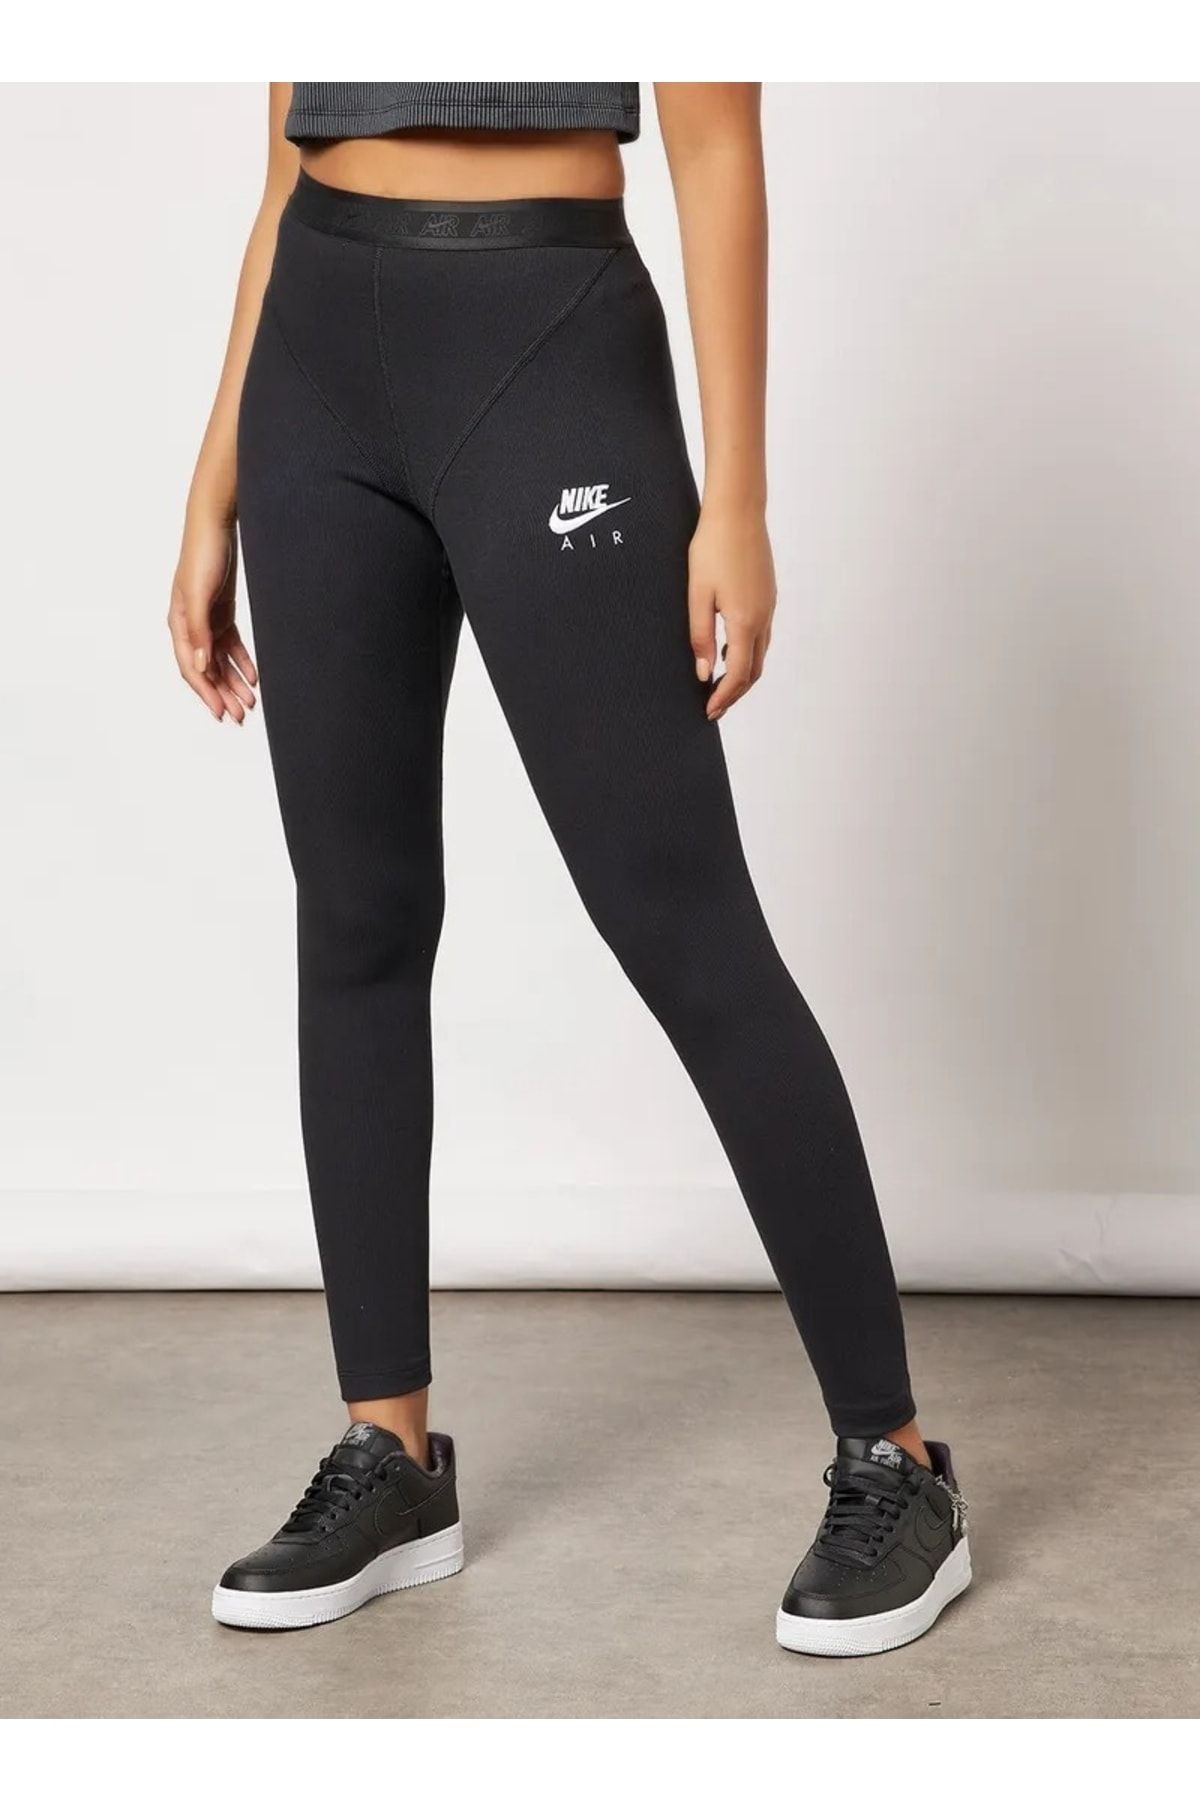 Nike / Women's Air Ribbed High-Rise Tights